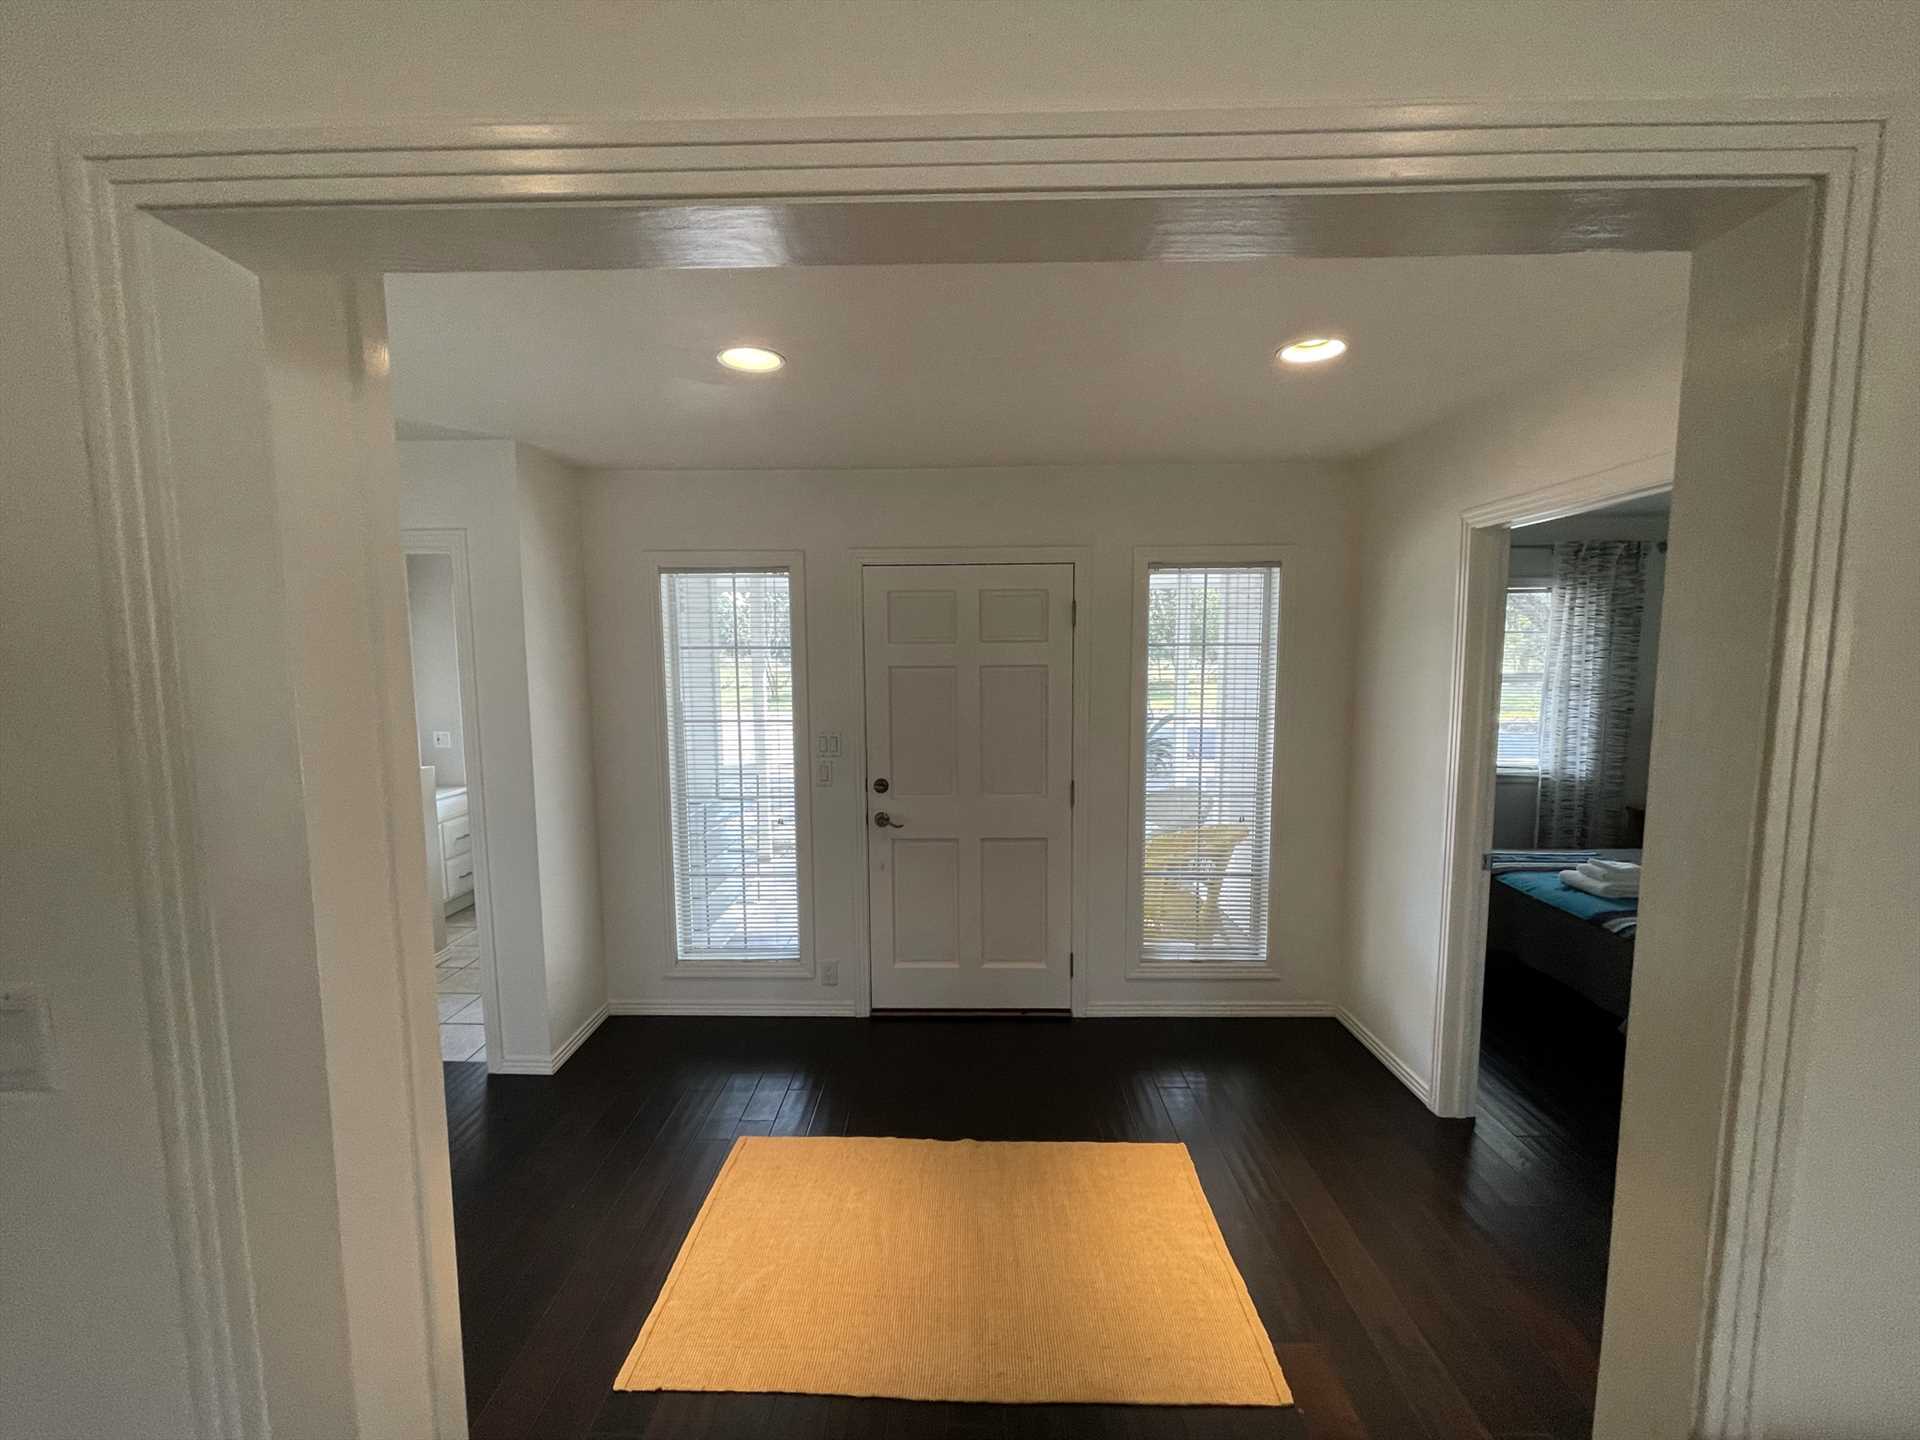                                                 Clean and elegant lines mark the entrance foyer in the Live Oak Cottage, offering a classy and warm welcome to the Hill Country!